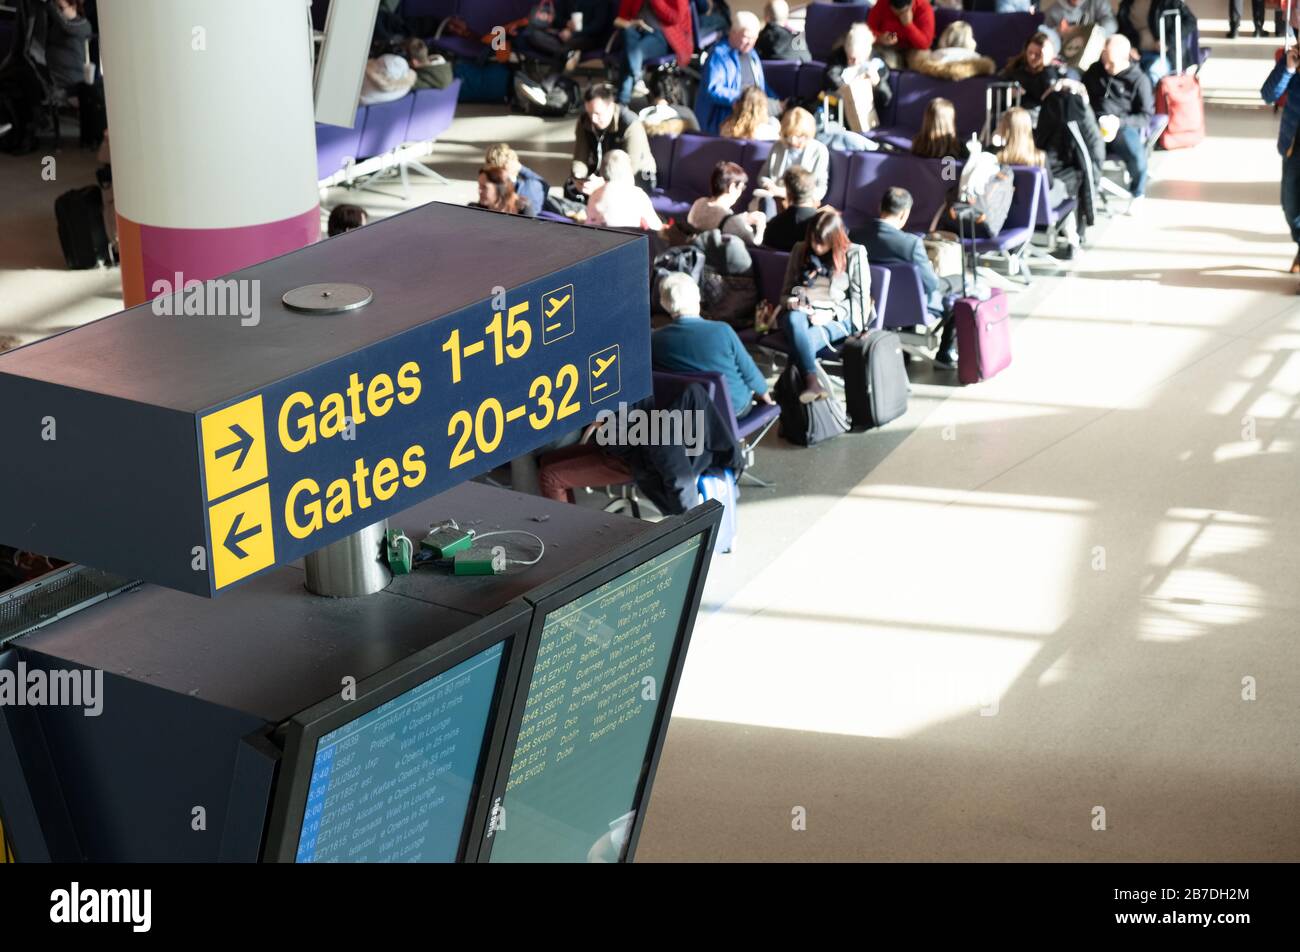 Airport waiting area in departures, passengers waiting, sign to departure gates Stock Photo